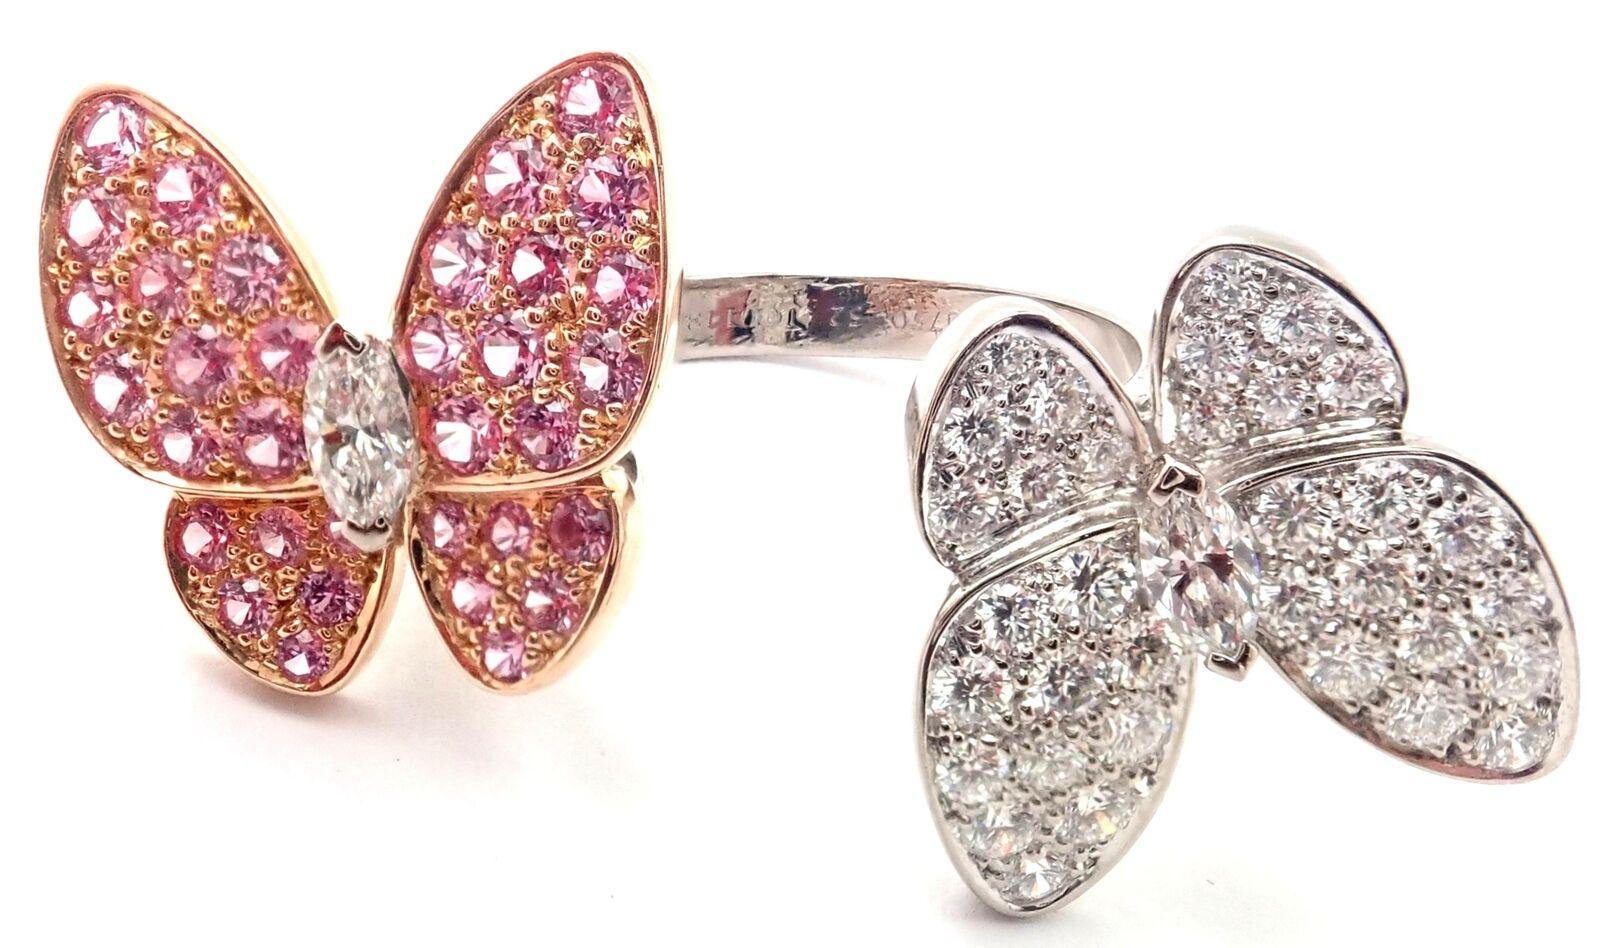 18k White Gold Diamond And Pink Sapphire Two Butterfly Between the Finger Ring 
by Van Cleef & Arpels.
With 36 round brilliant cut diamond VVS1 clarity, E color total weight .99ct
34 round pink sapphires total weight .88ct
This ring comes with Van